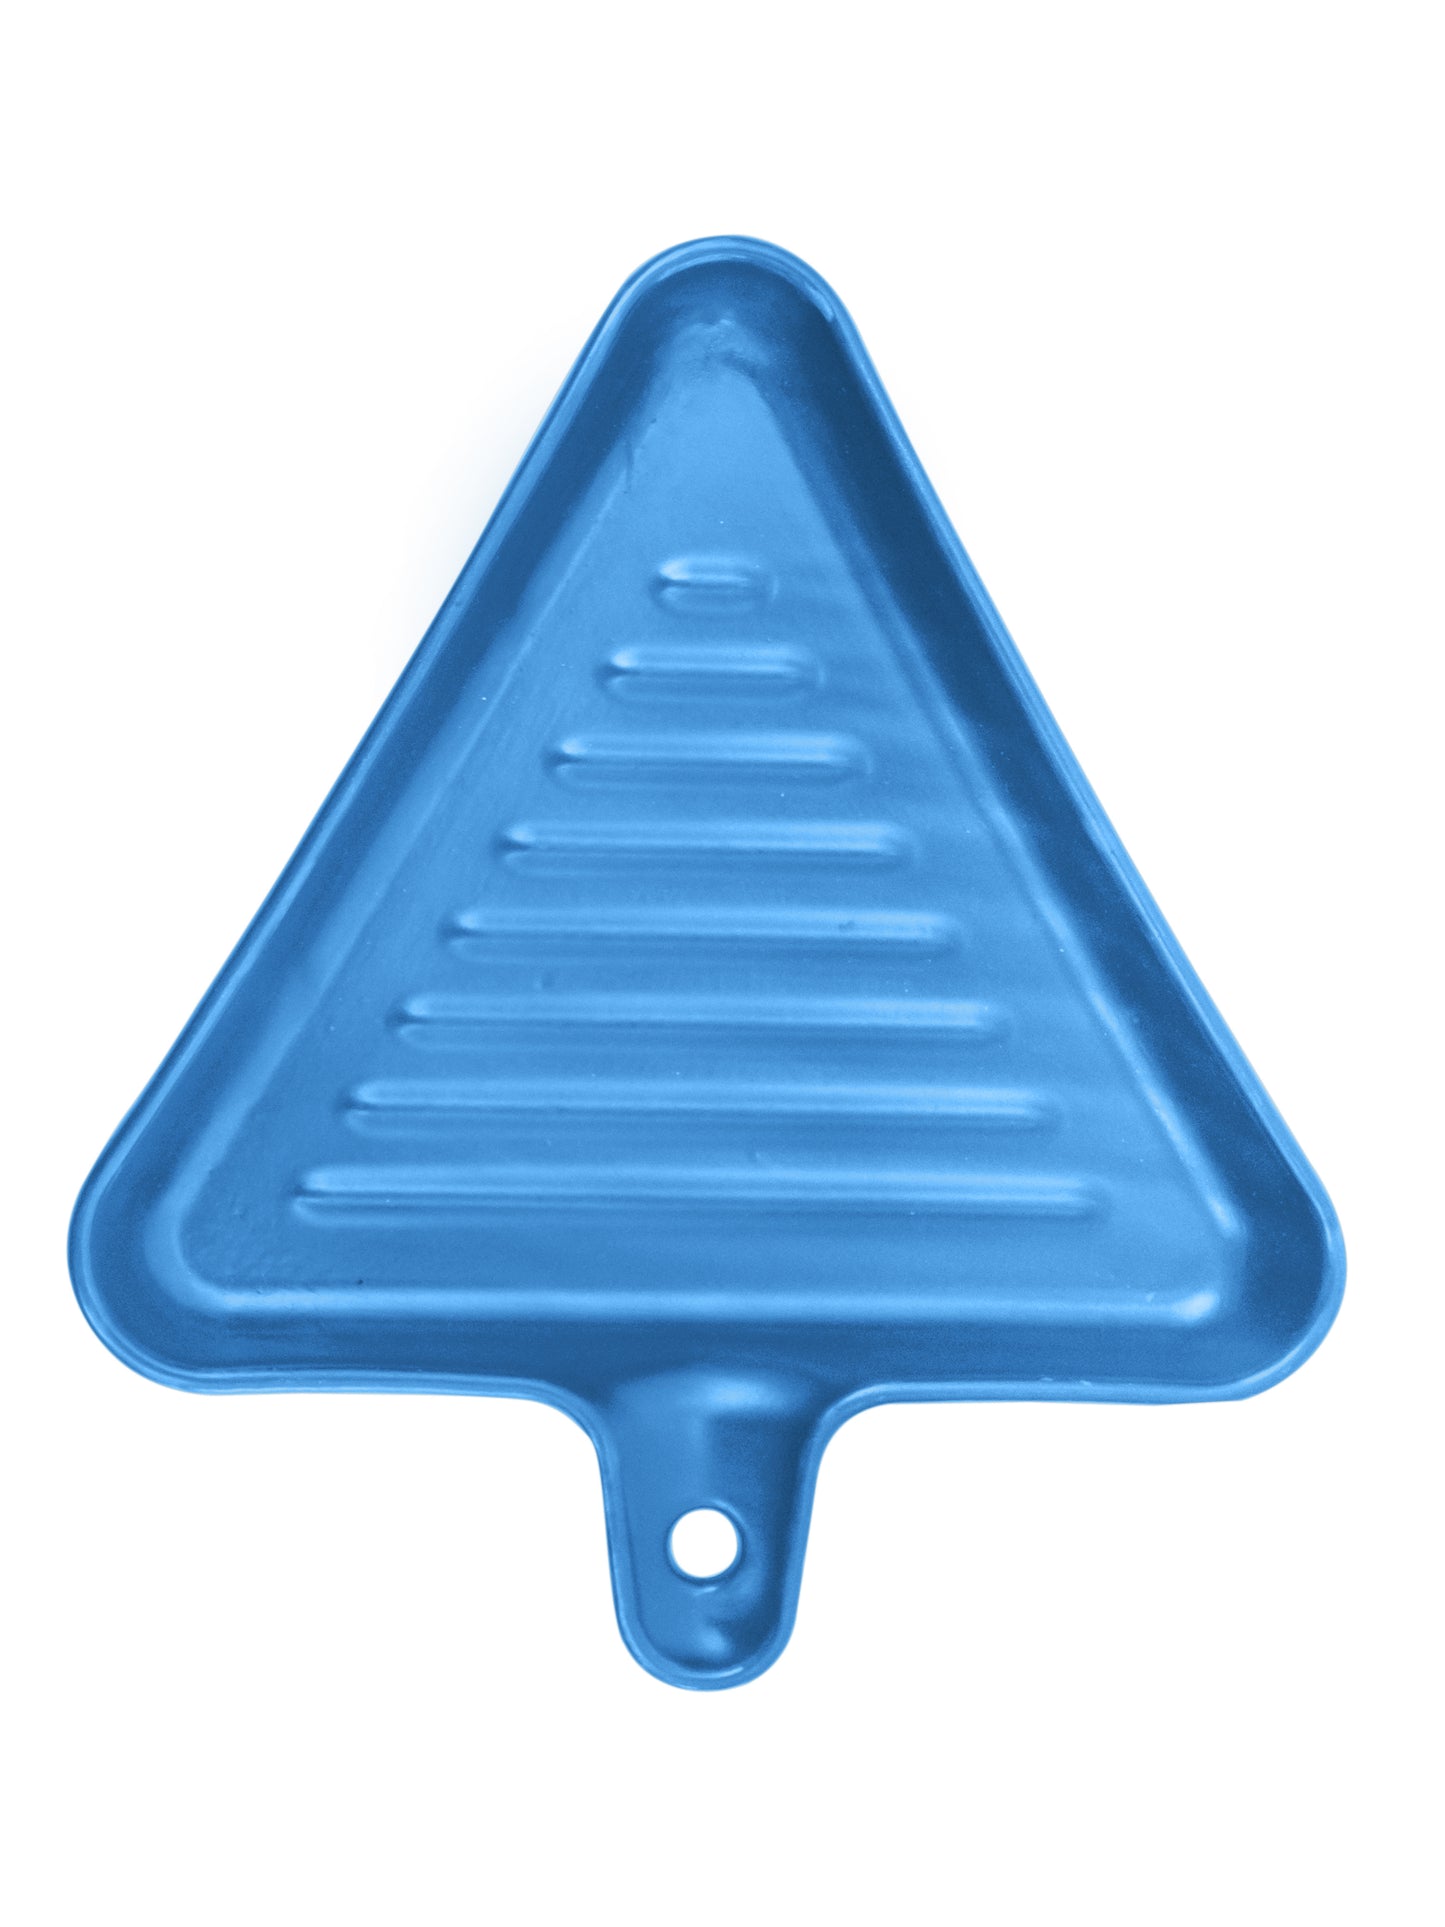 Ceramic Triangle Grill Plates for Serving, Blue